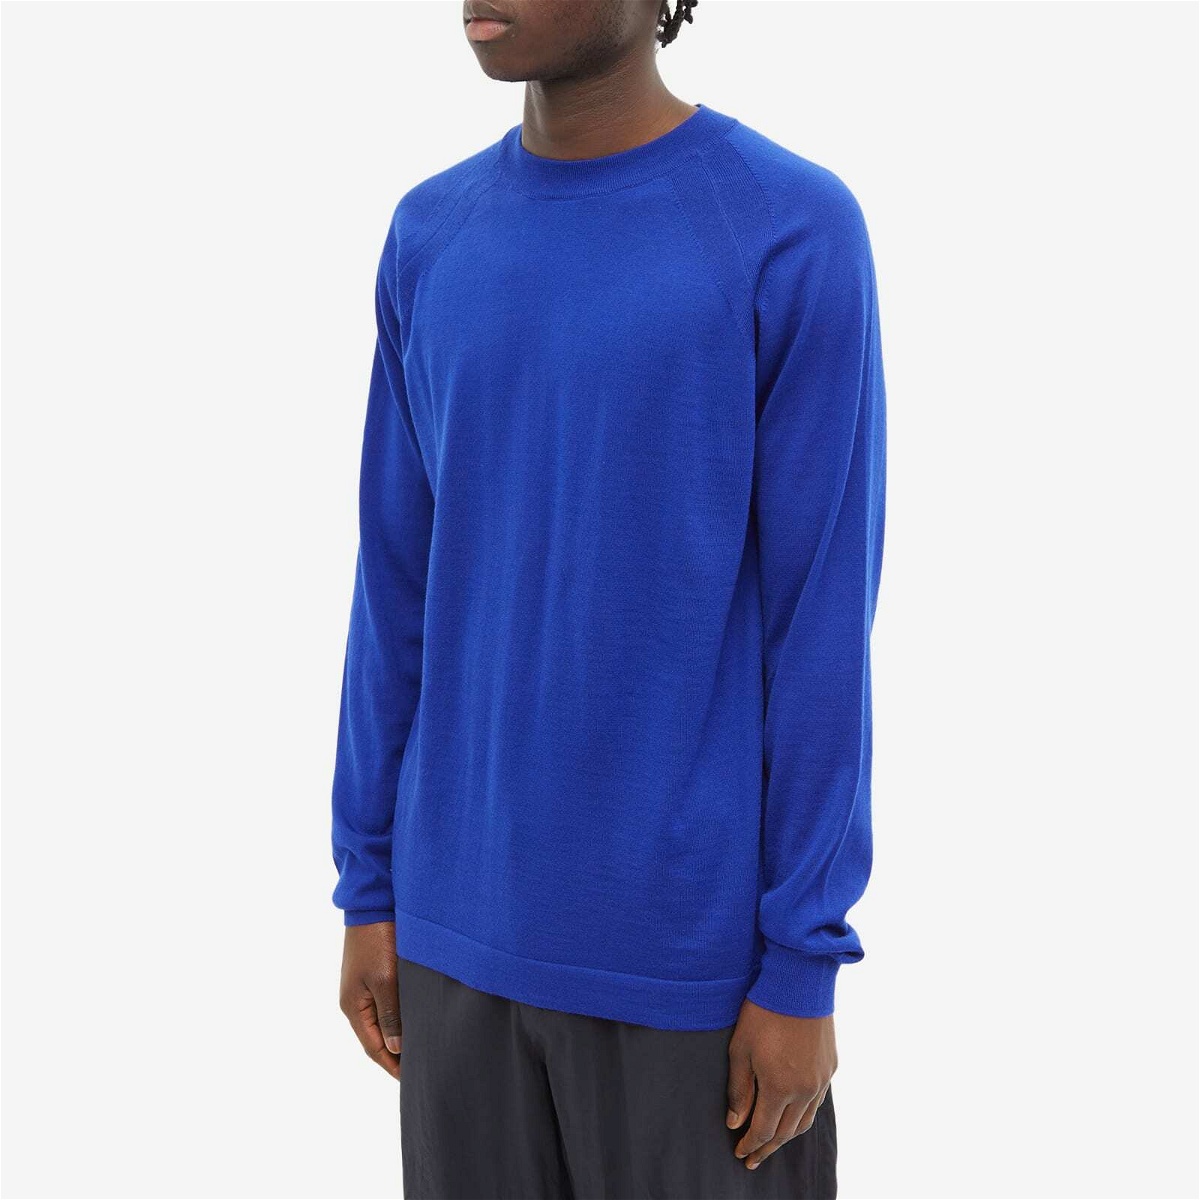 Norse Projects Men's Tech Merino Crew in Cobalt Blue Norse Projects